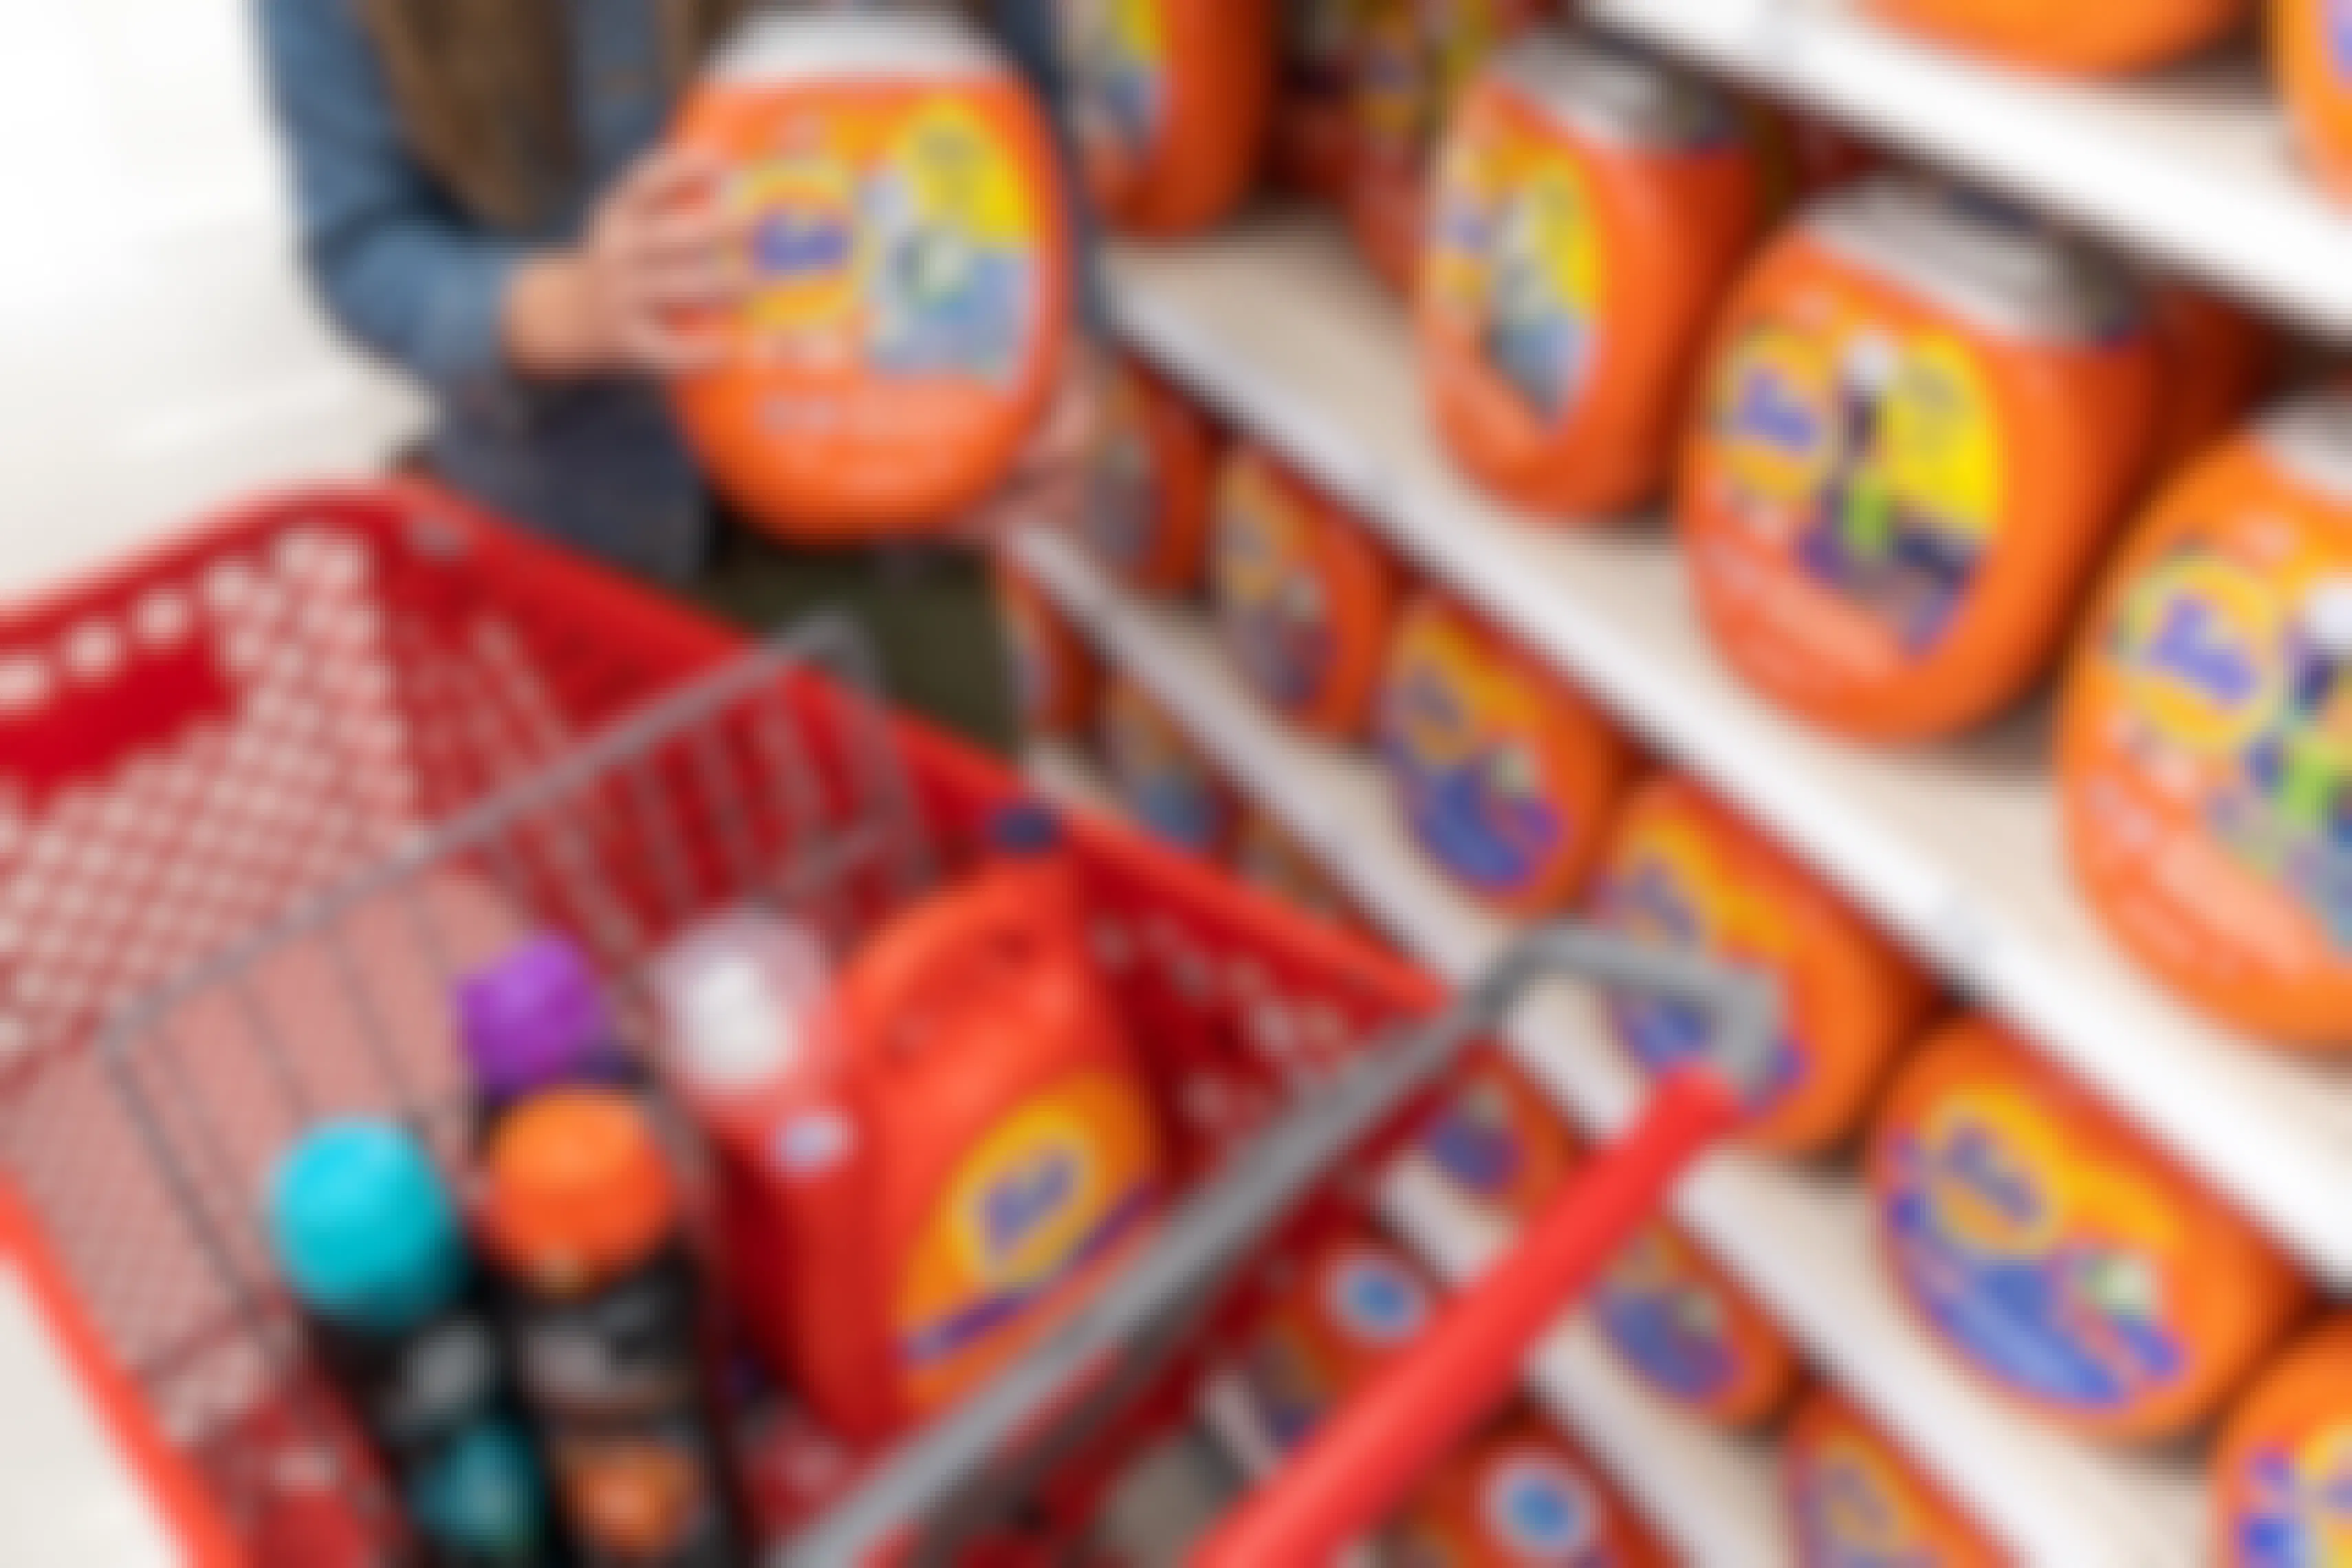 A woman standing behind a red Target shopping cart, holding a container of tide pods, with other laundry products in the basket.